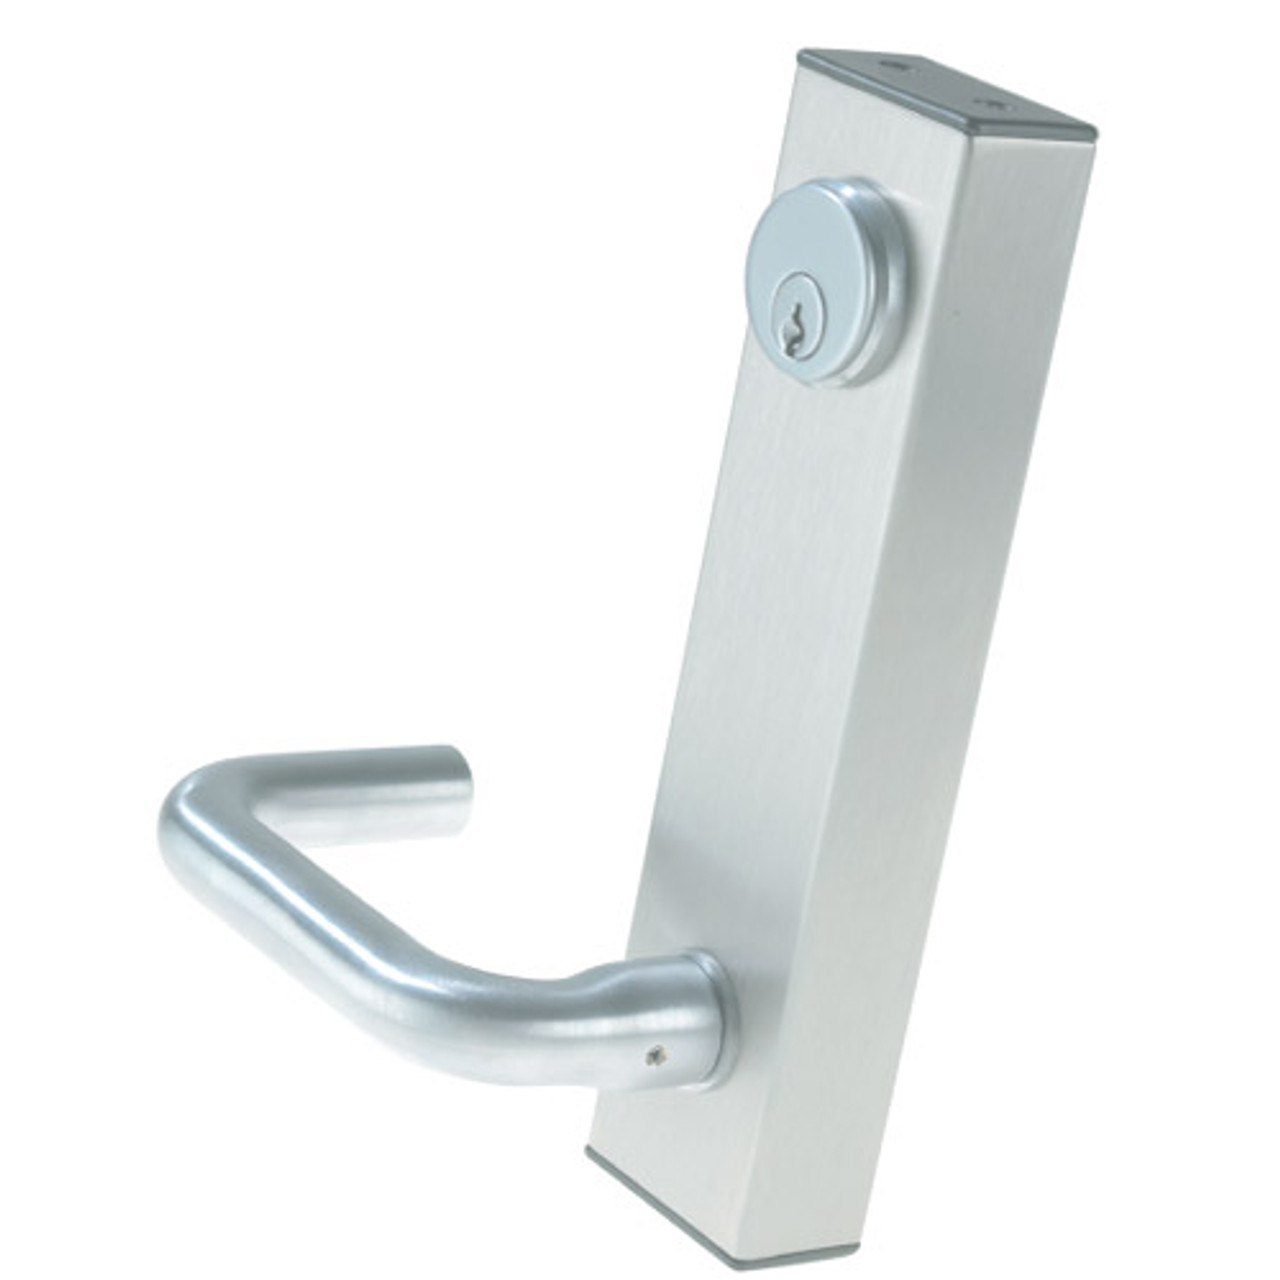 3080E-02-0-91-35 US32 Adams Rite Electrified Entry Trim with Round Lever in Bright Stainless Finish